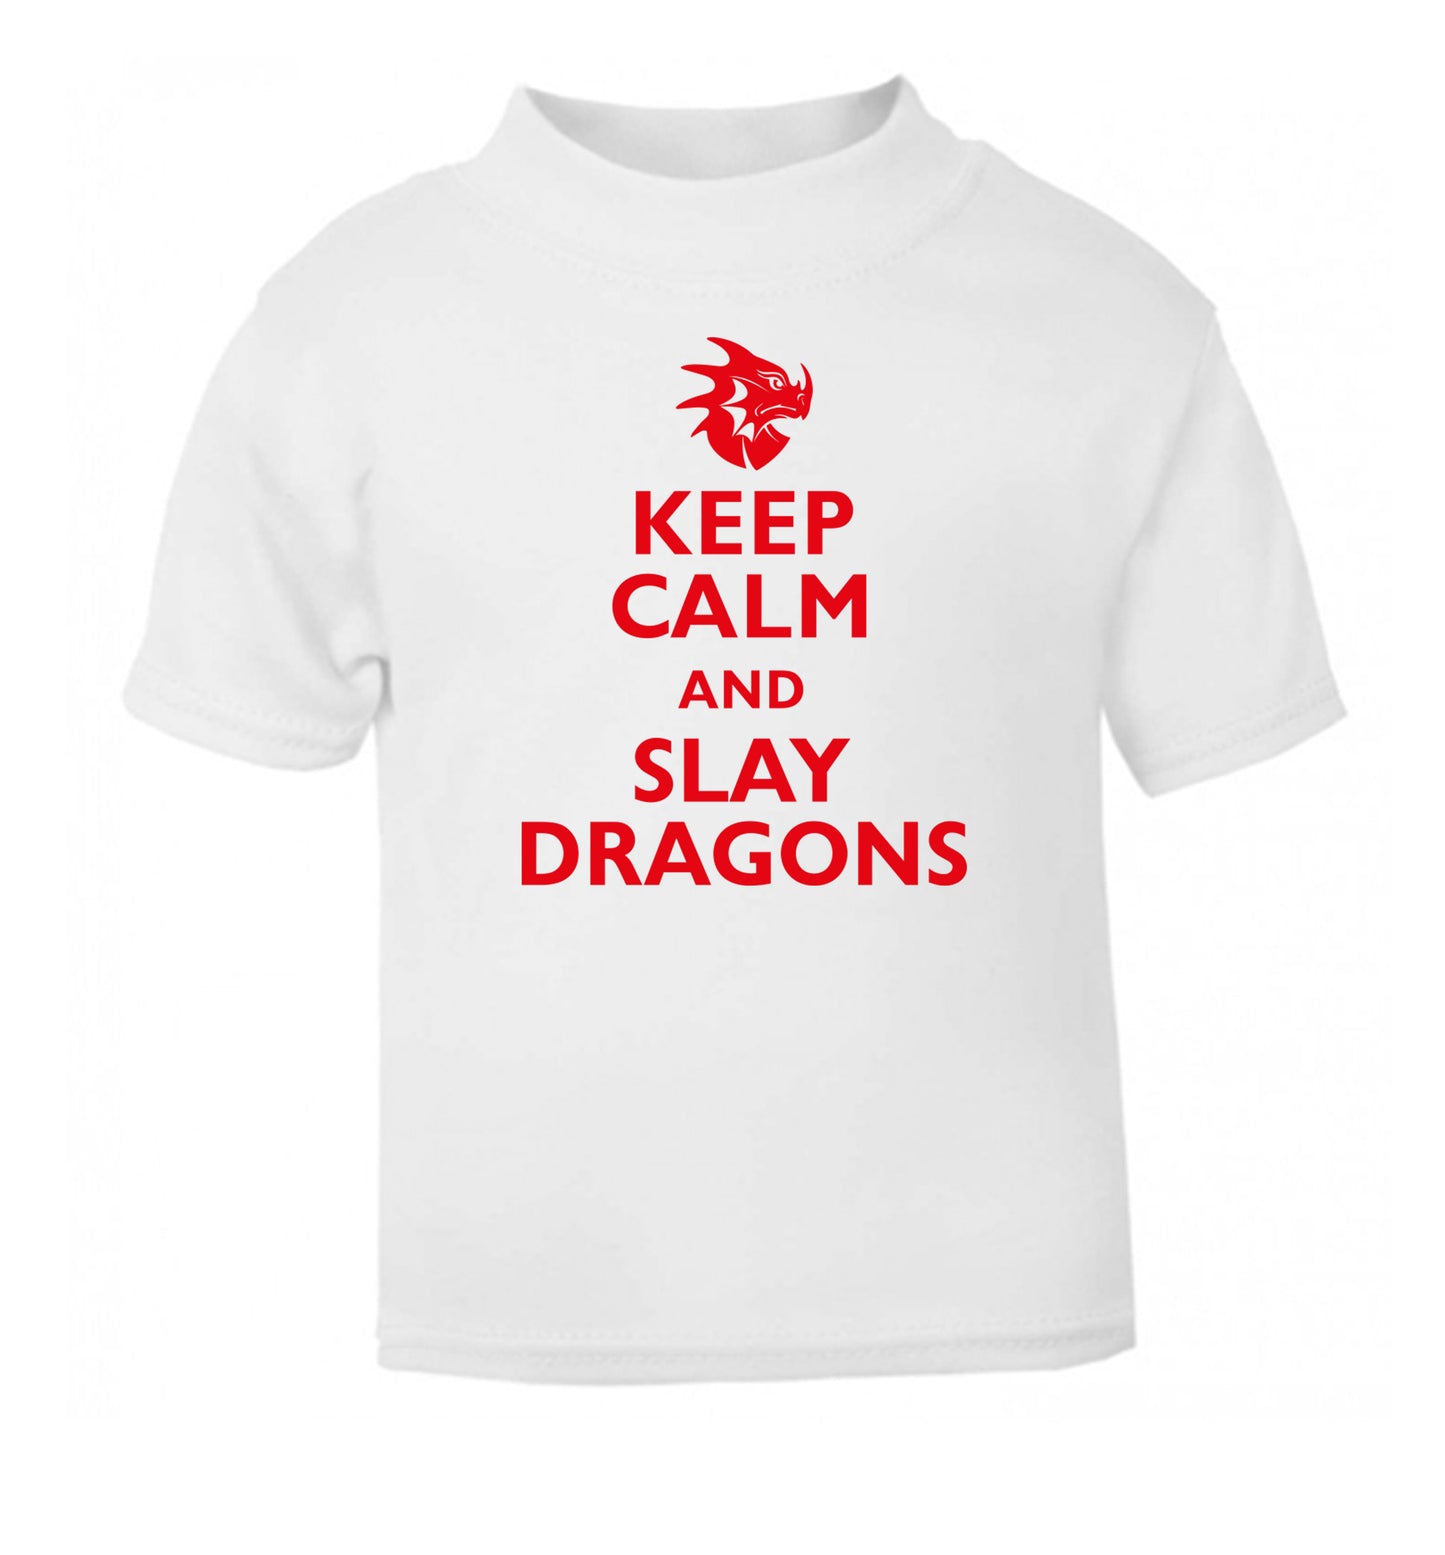 Keep calm and slay dragons white Baby Toddler Tshirt 2 Years